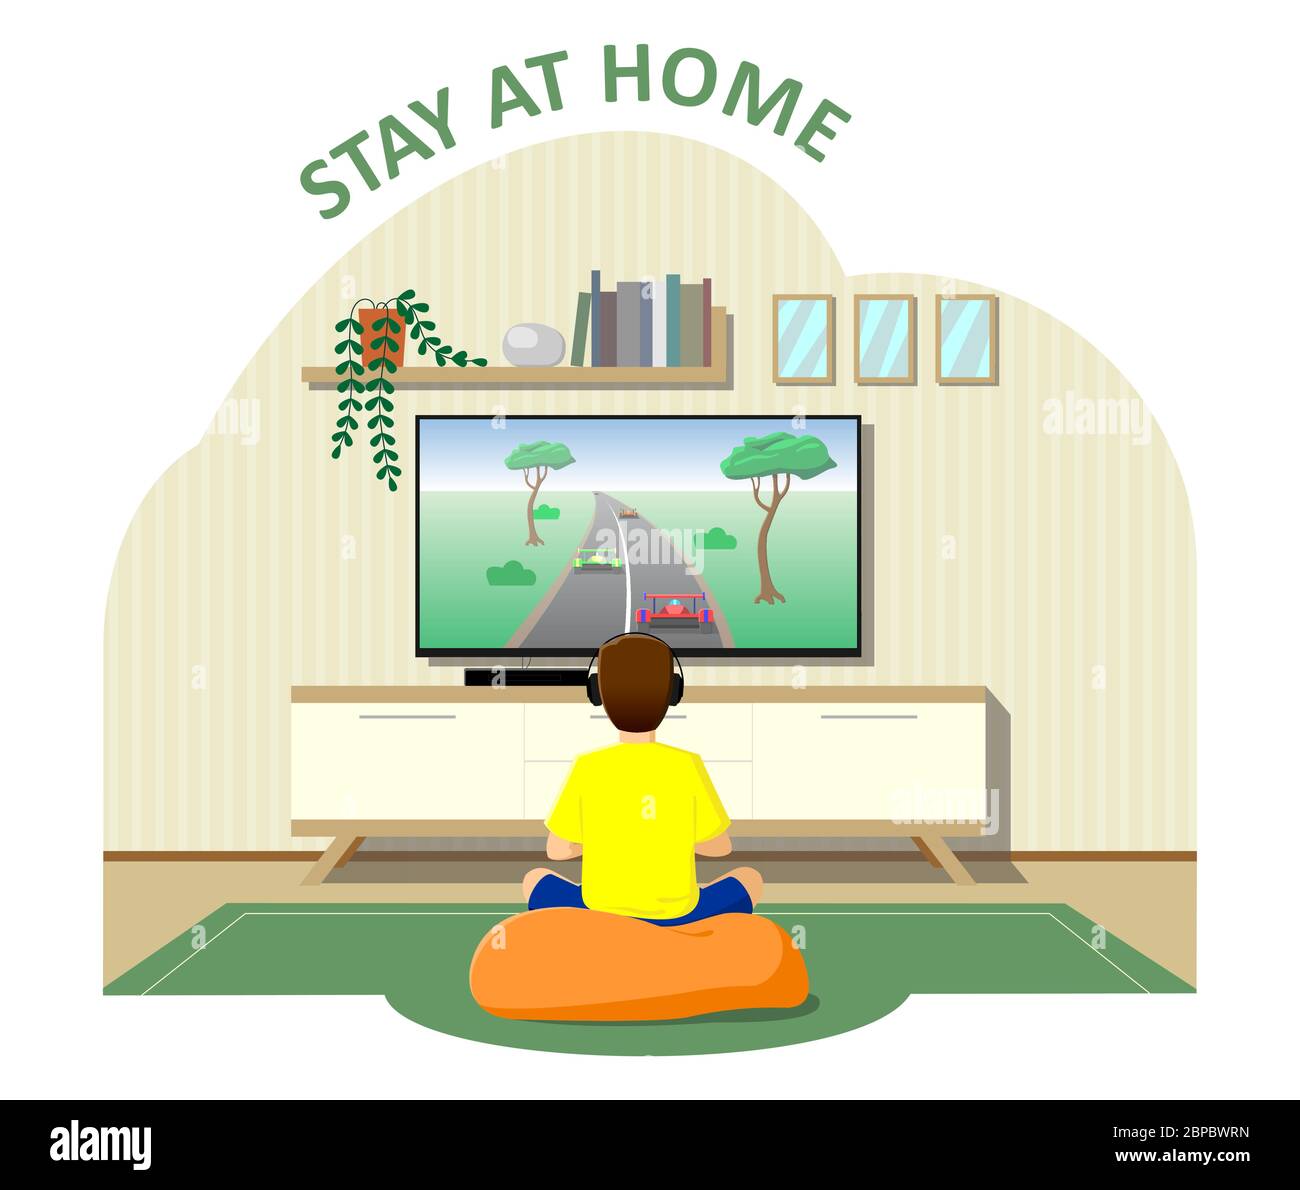 The boy sits in front of the TV, plays video games, the console. Stayed home, quarantine, isolation. Modern flat vector image. Stock Vector